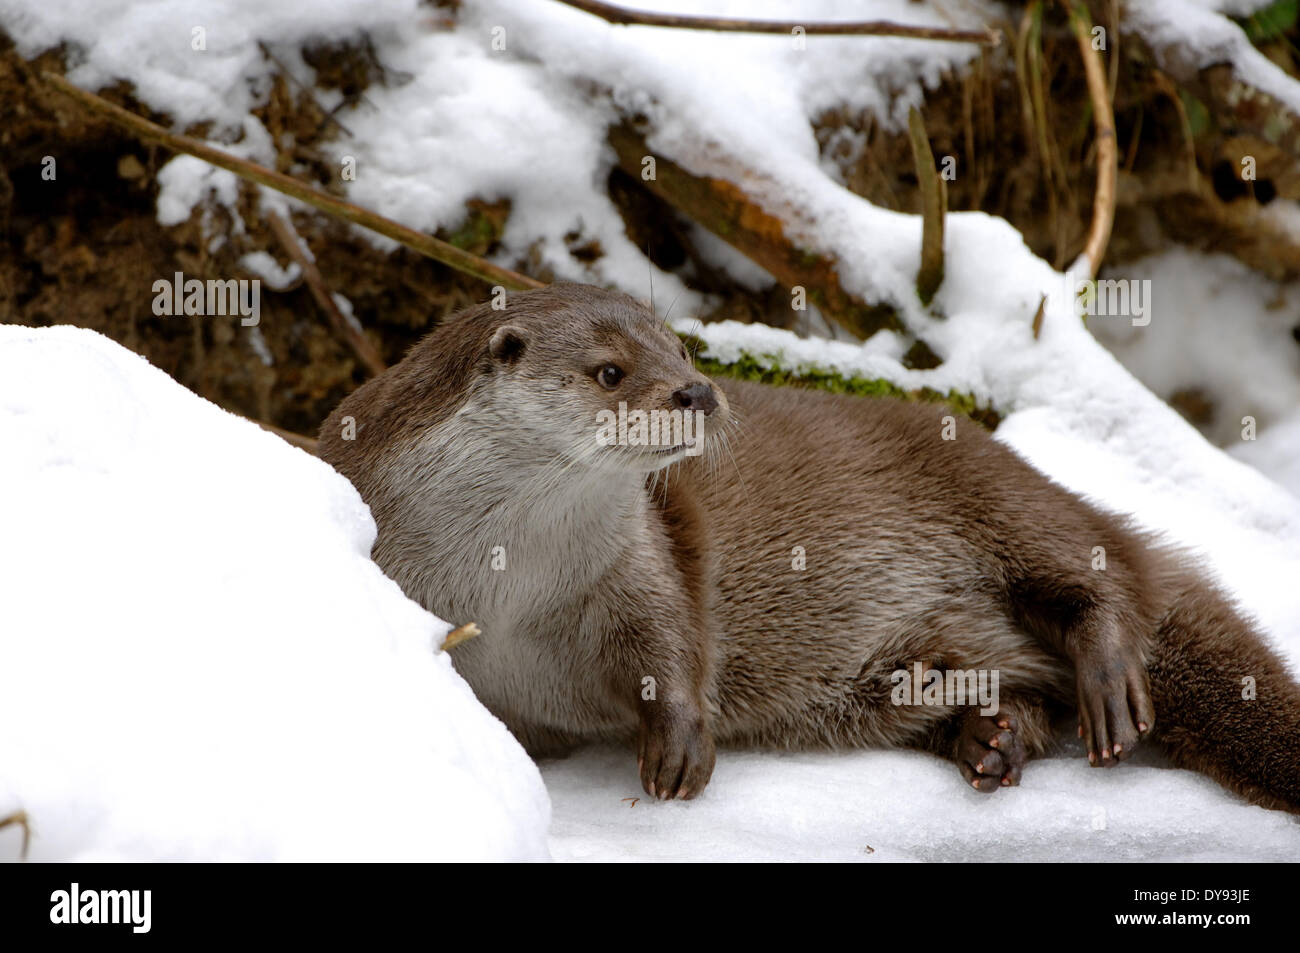 Otter Lutra lutra hairy-nosed otter mustelidae martens predators canids otters water predator fish marten animal animals Germ Stock Photo